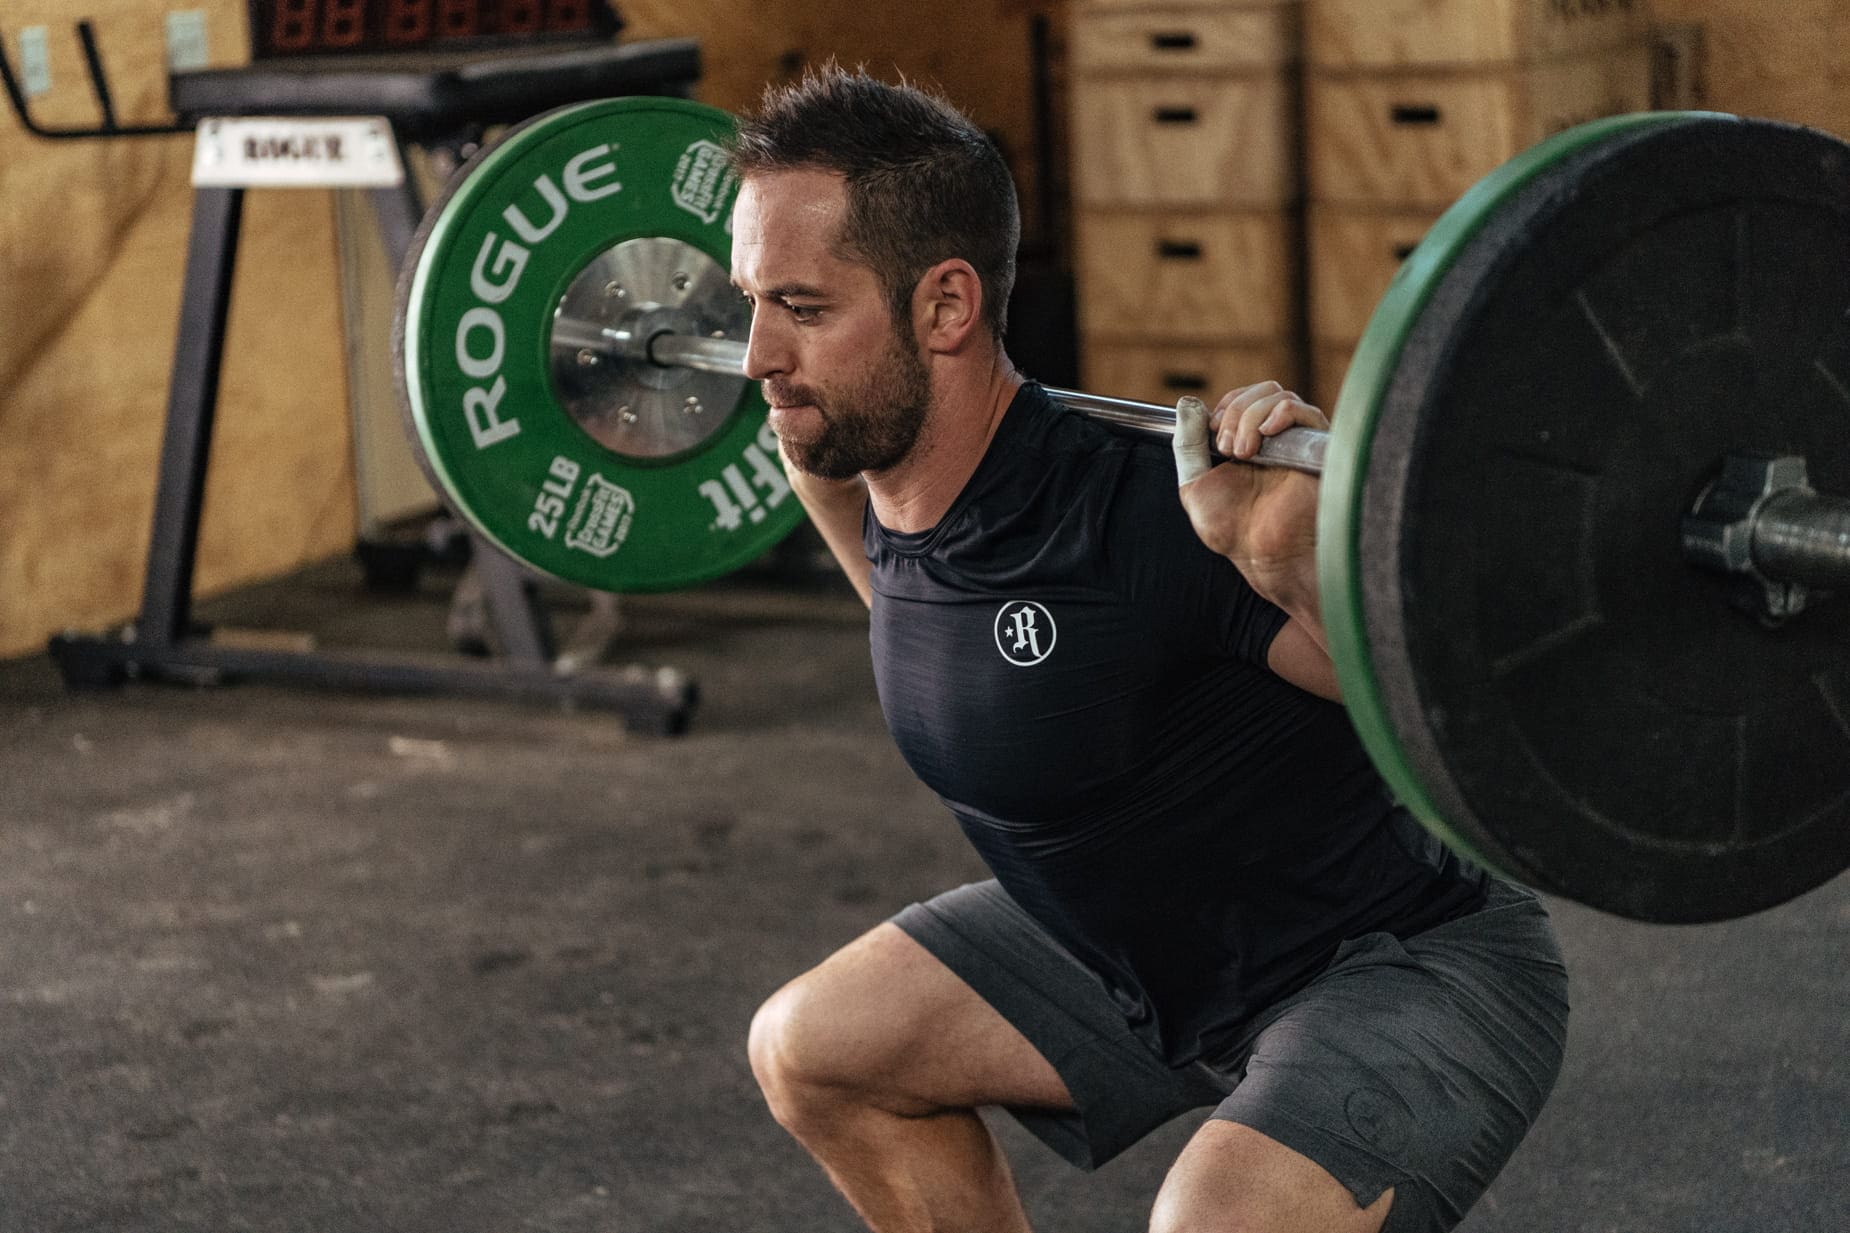 NEWS - Rich Froning Designs Training Capsule Collection for Reebok ...